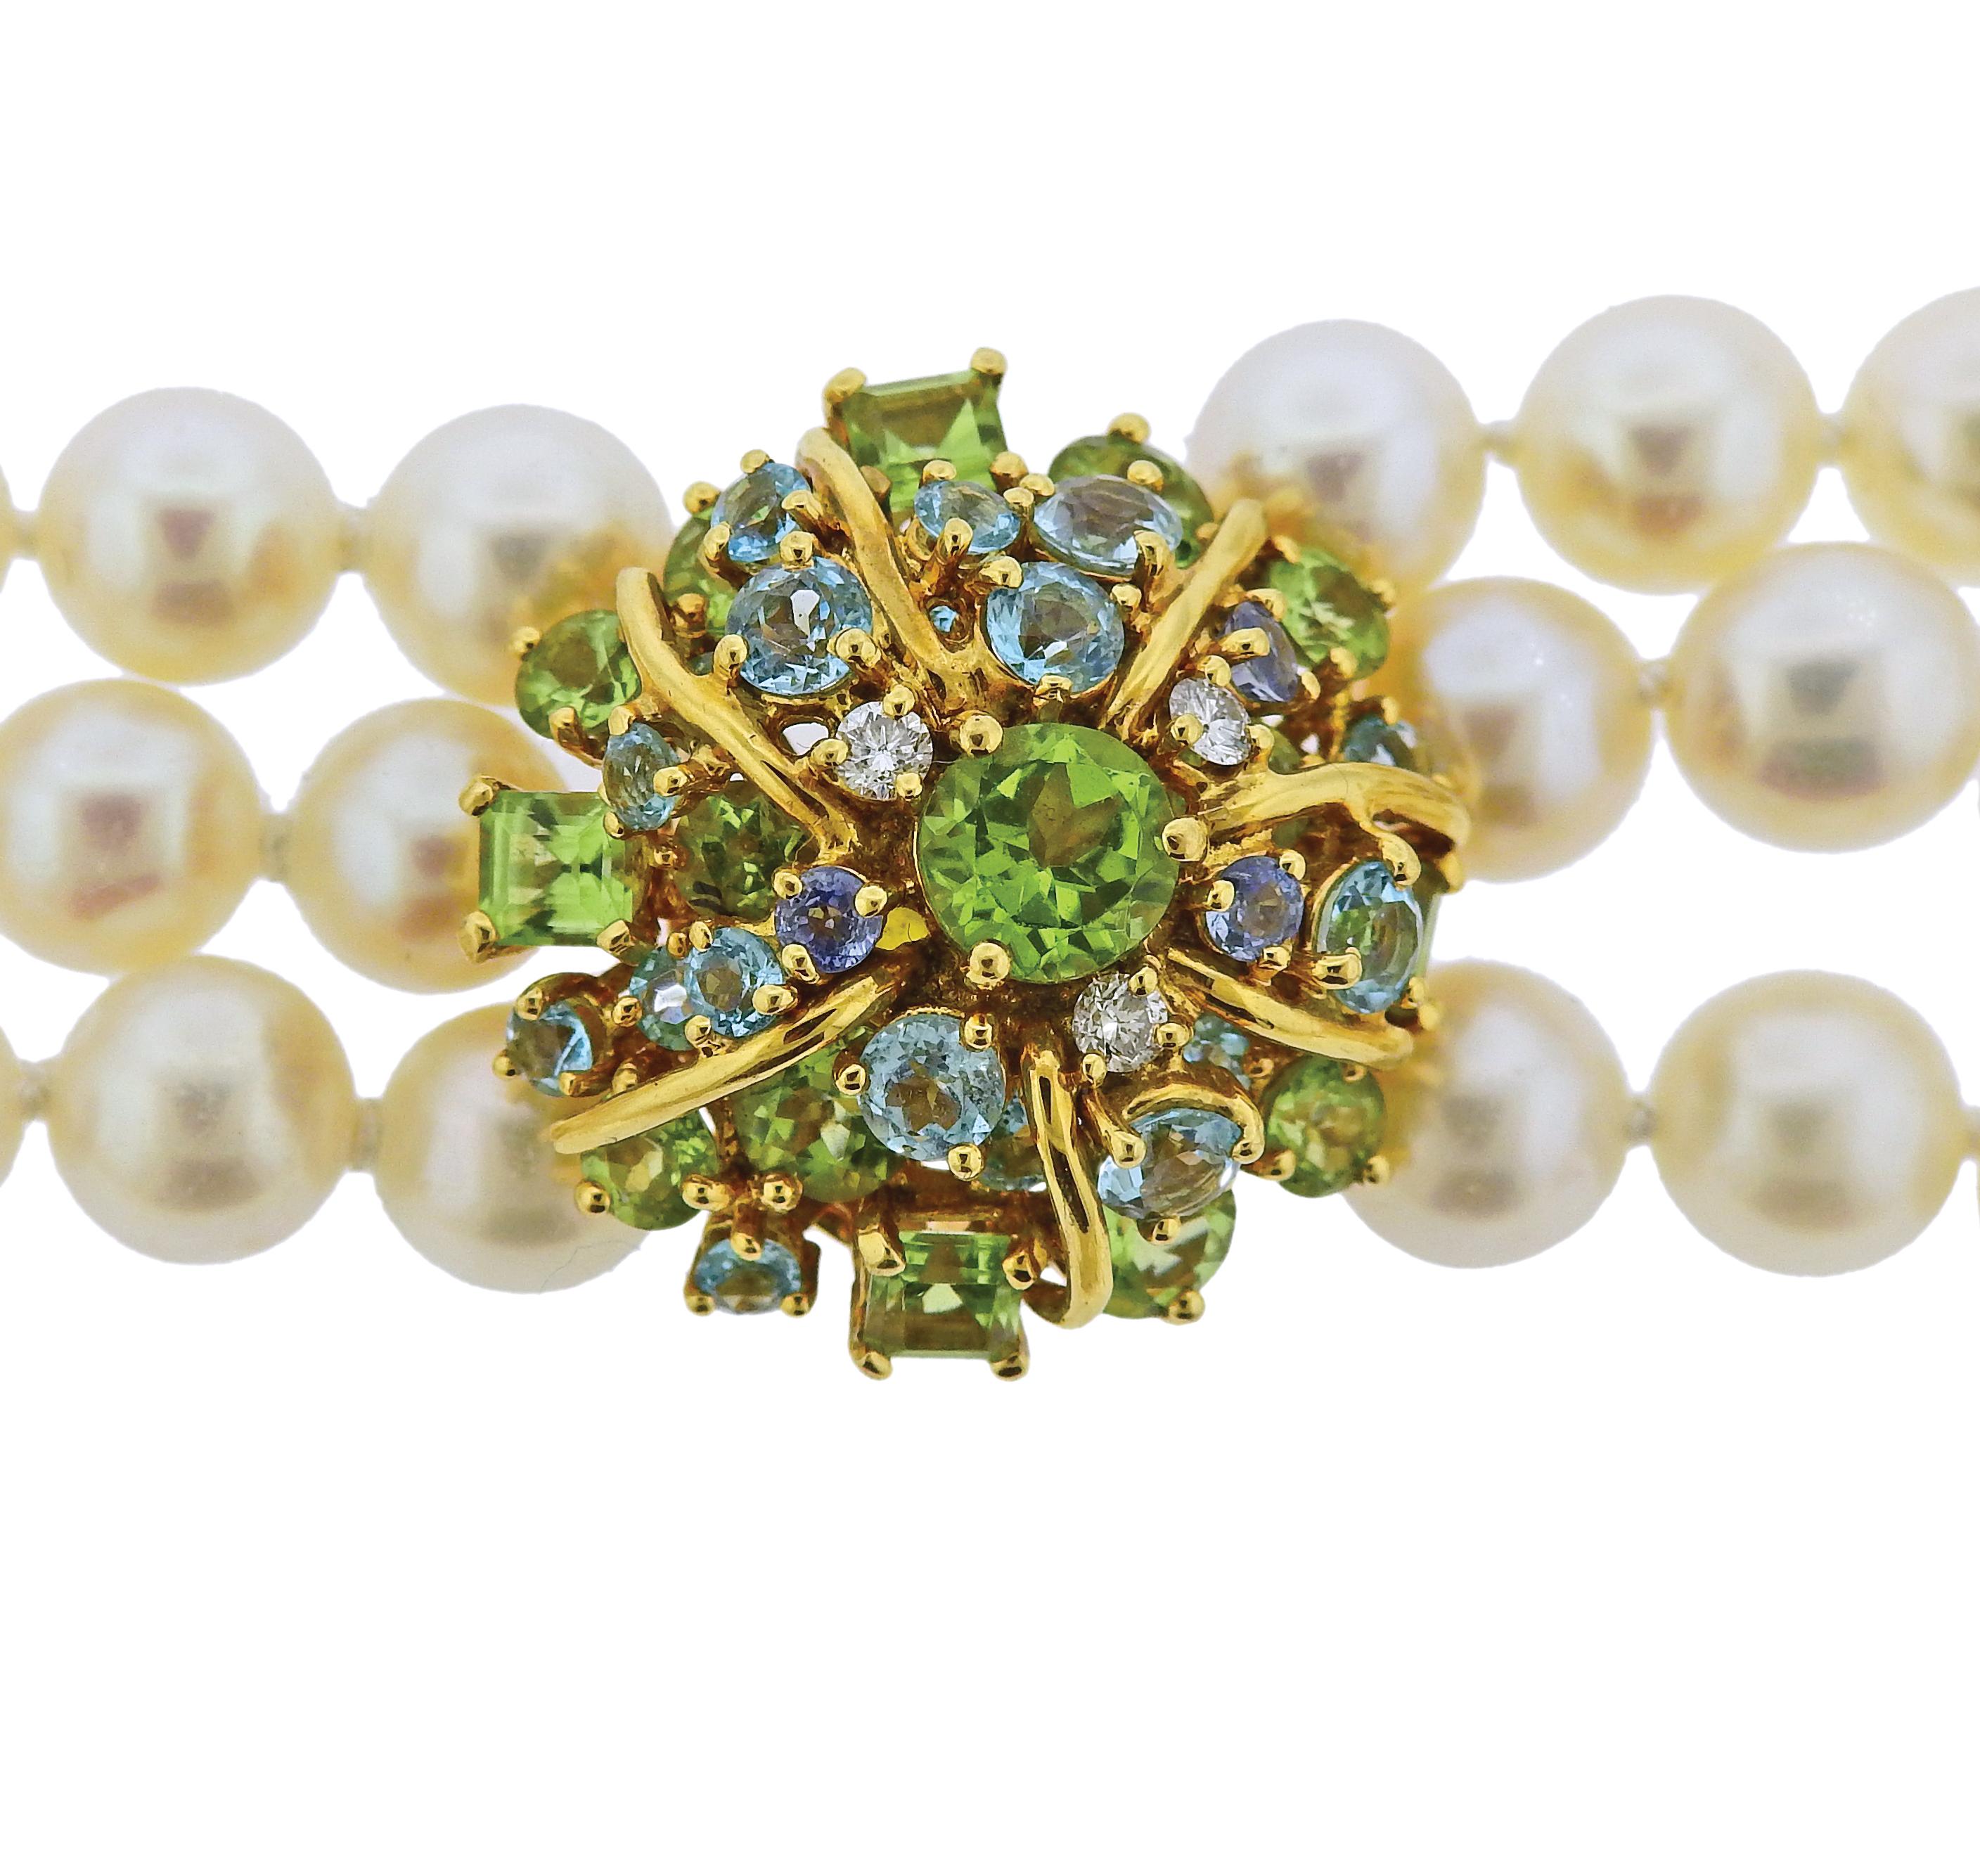 Impressive multi strand necklace by Seaman Schepps, featuring 8 - 8.5mm pearls, as well as multi gemstone clasp, set with peridots, aquamarines and approx. 0.18ctw in G/VS diamonds. Retail $14650. Necklace is 17